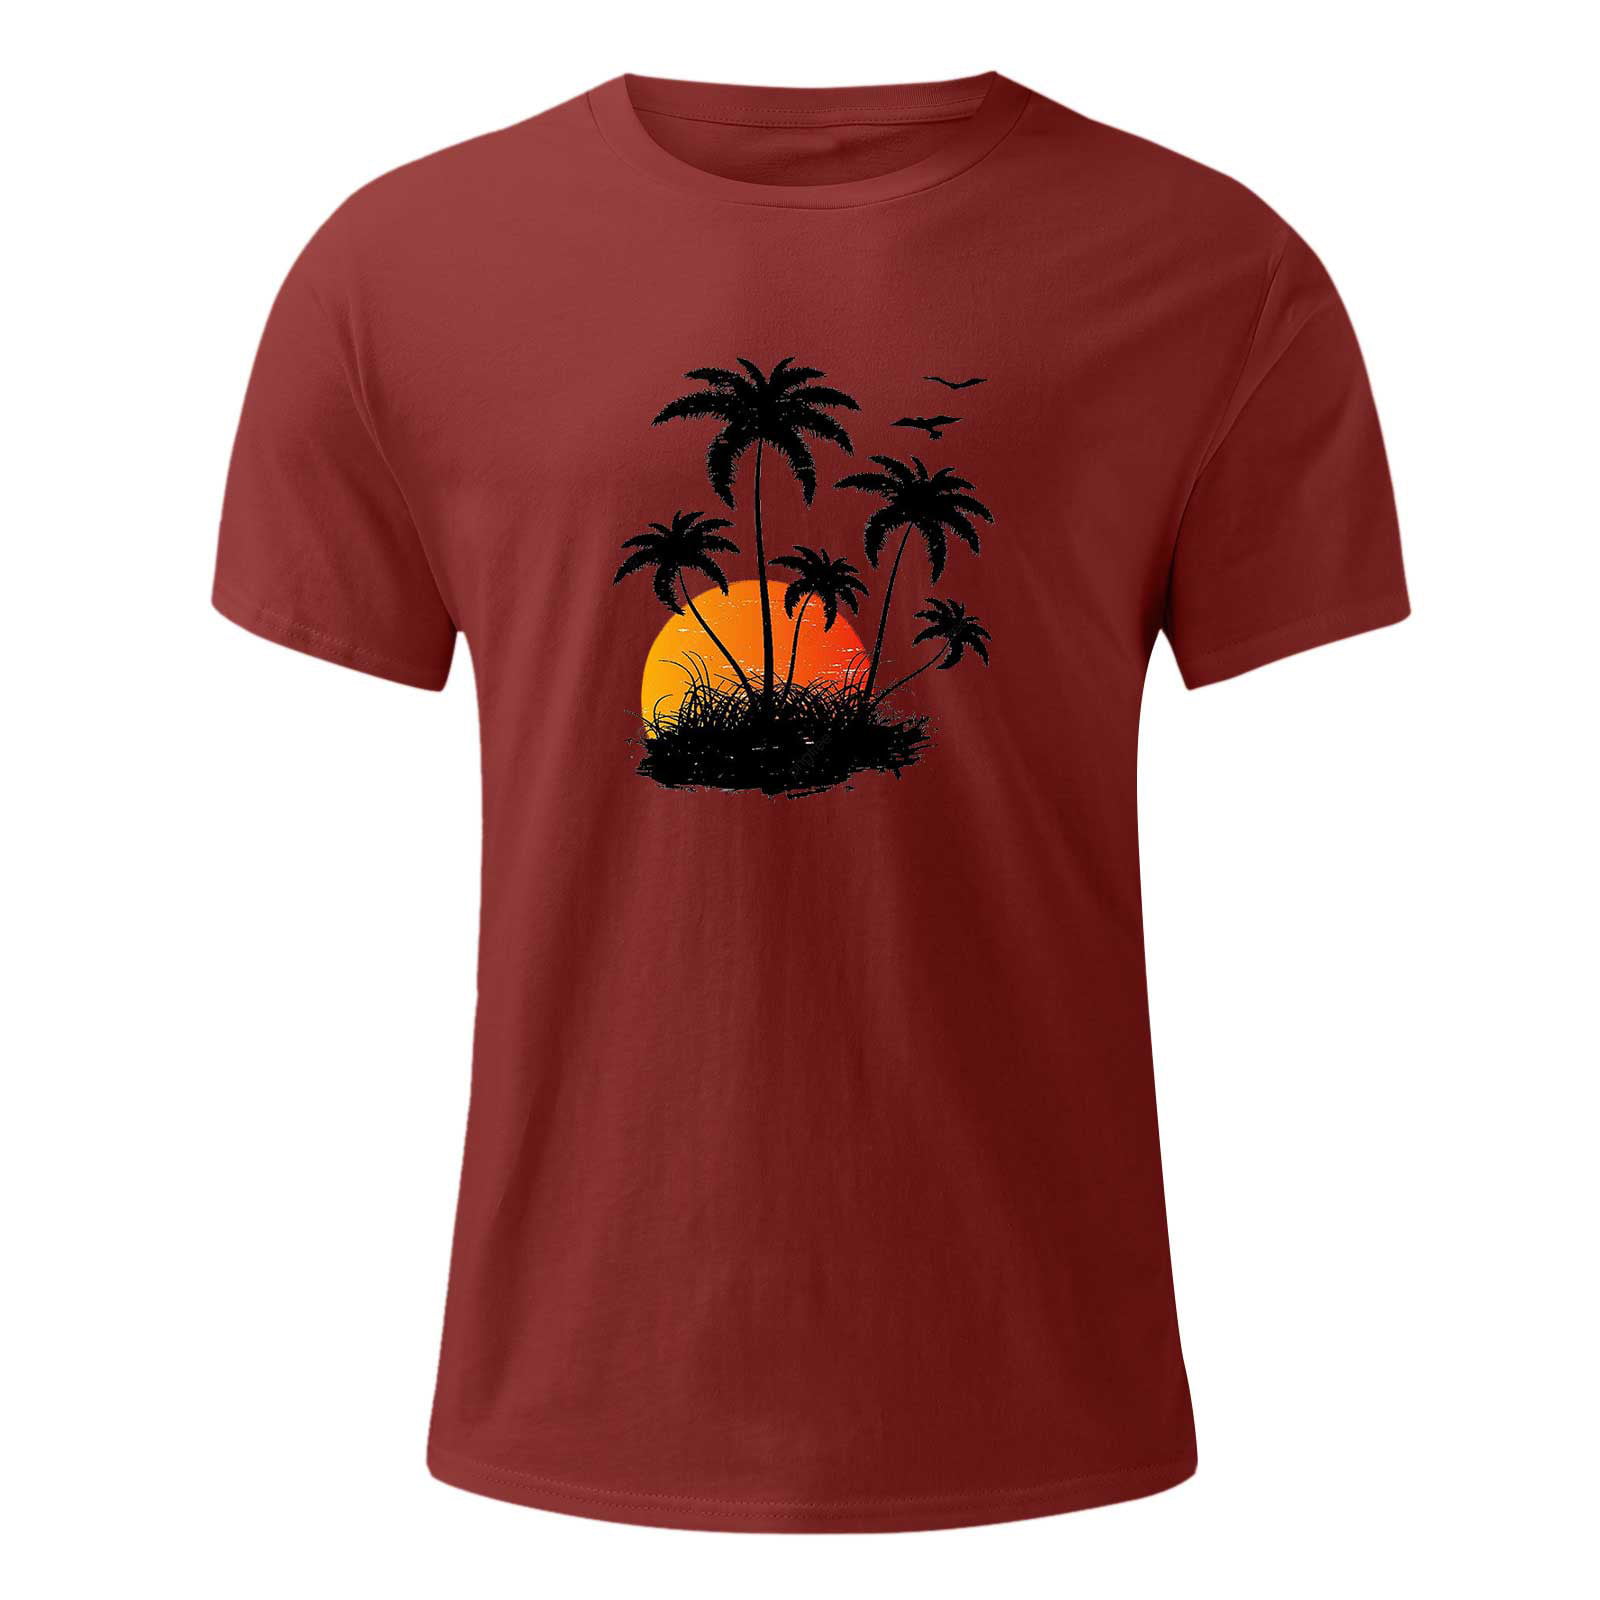 ZCFZJW Tropical Sunset Palm Tree Graphic T-Shirts for Men Summer Short  Sleeve Casual Round Neck Pullover Tshirt Tops Trendy Hawaiian Beach Shirts  Blue 